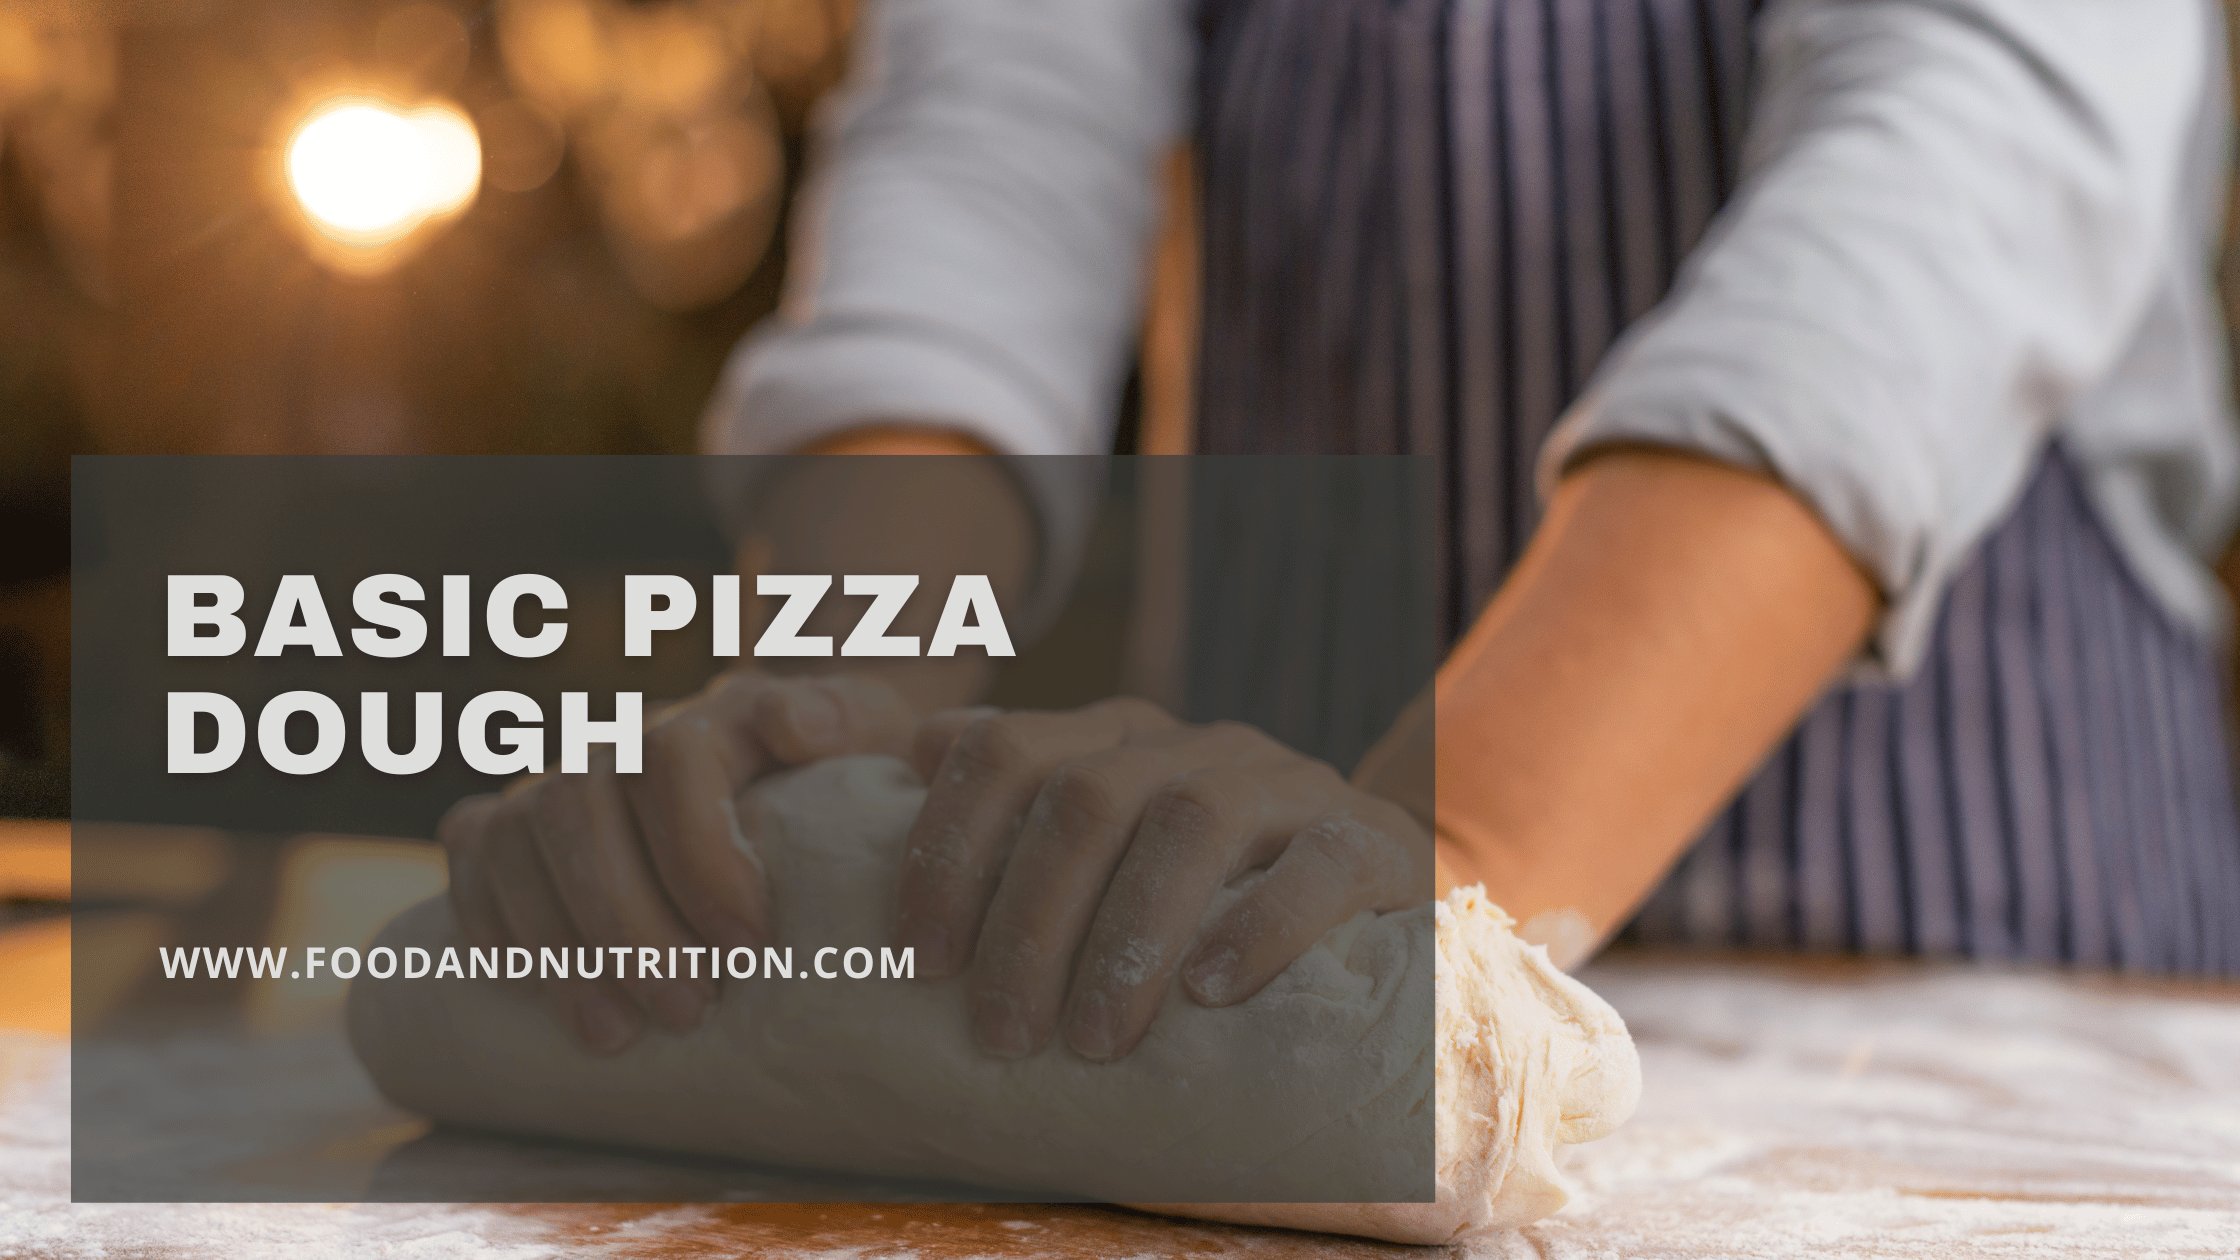 Basic Pizza Dough: Unleash Your Culinary Creativity with this Timeless Recipe